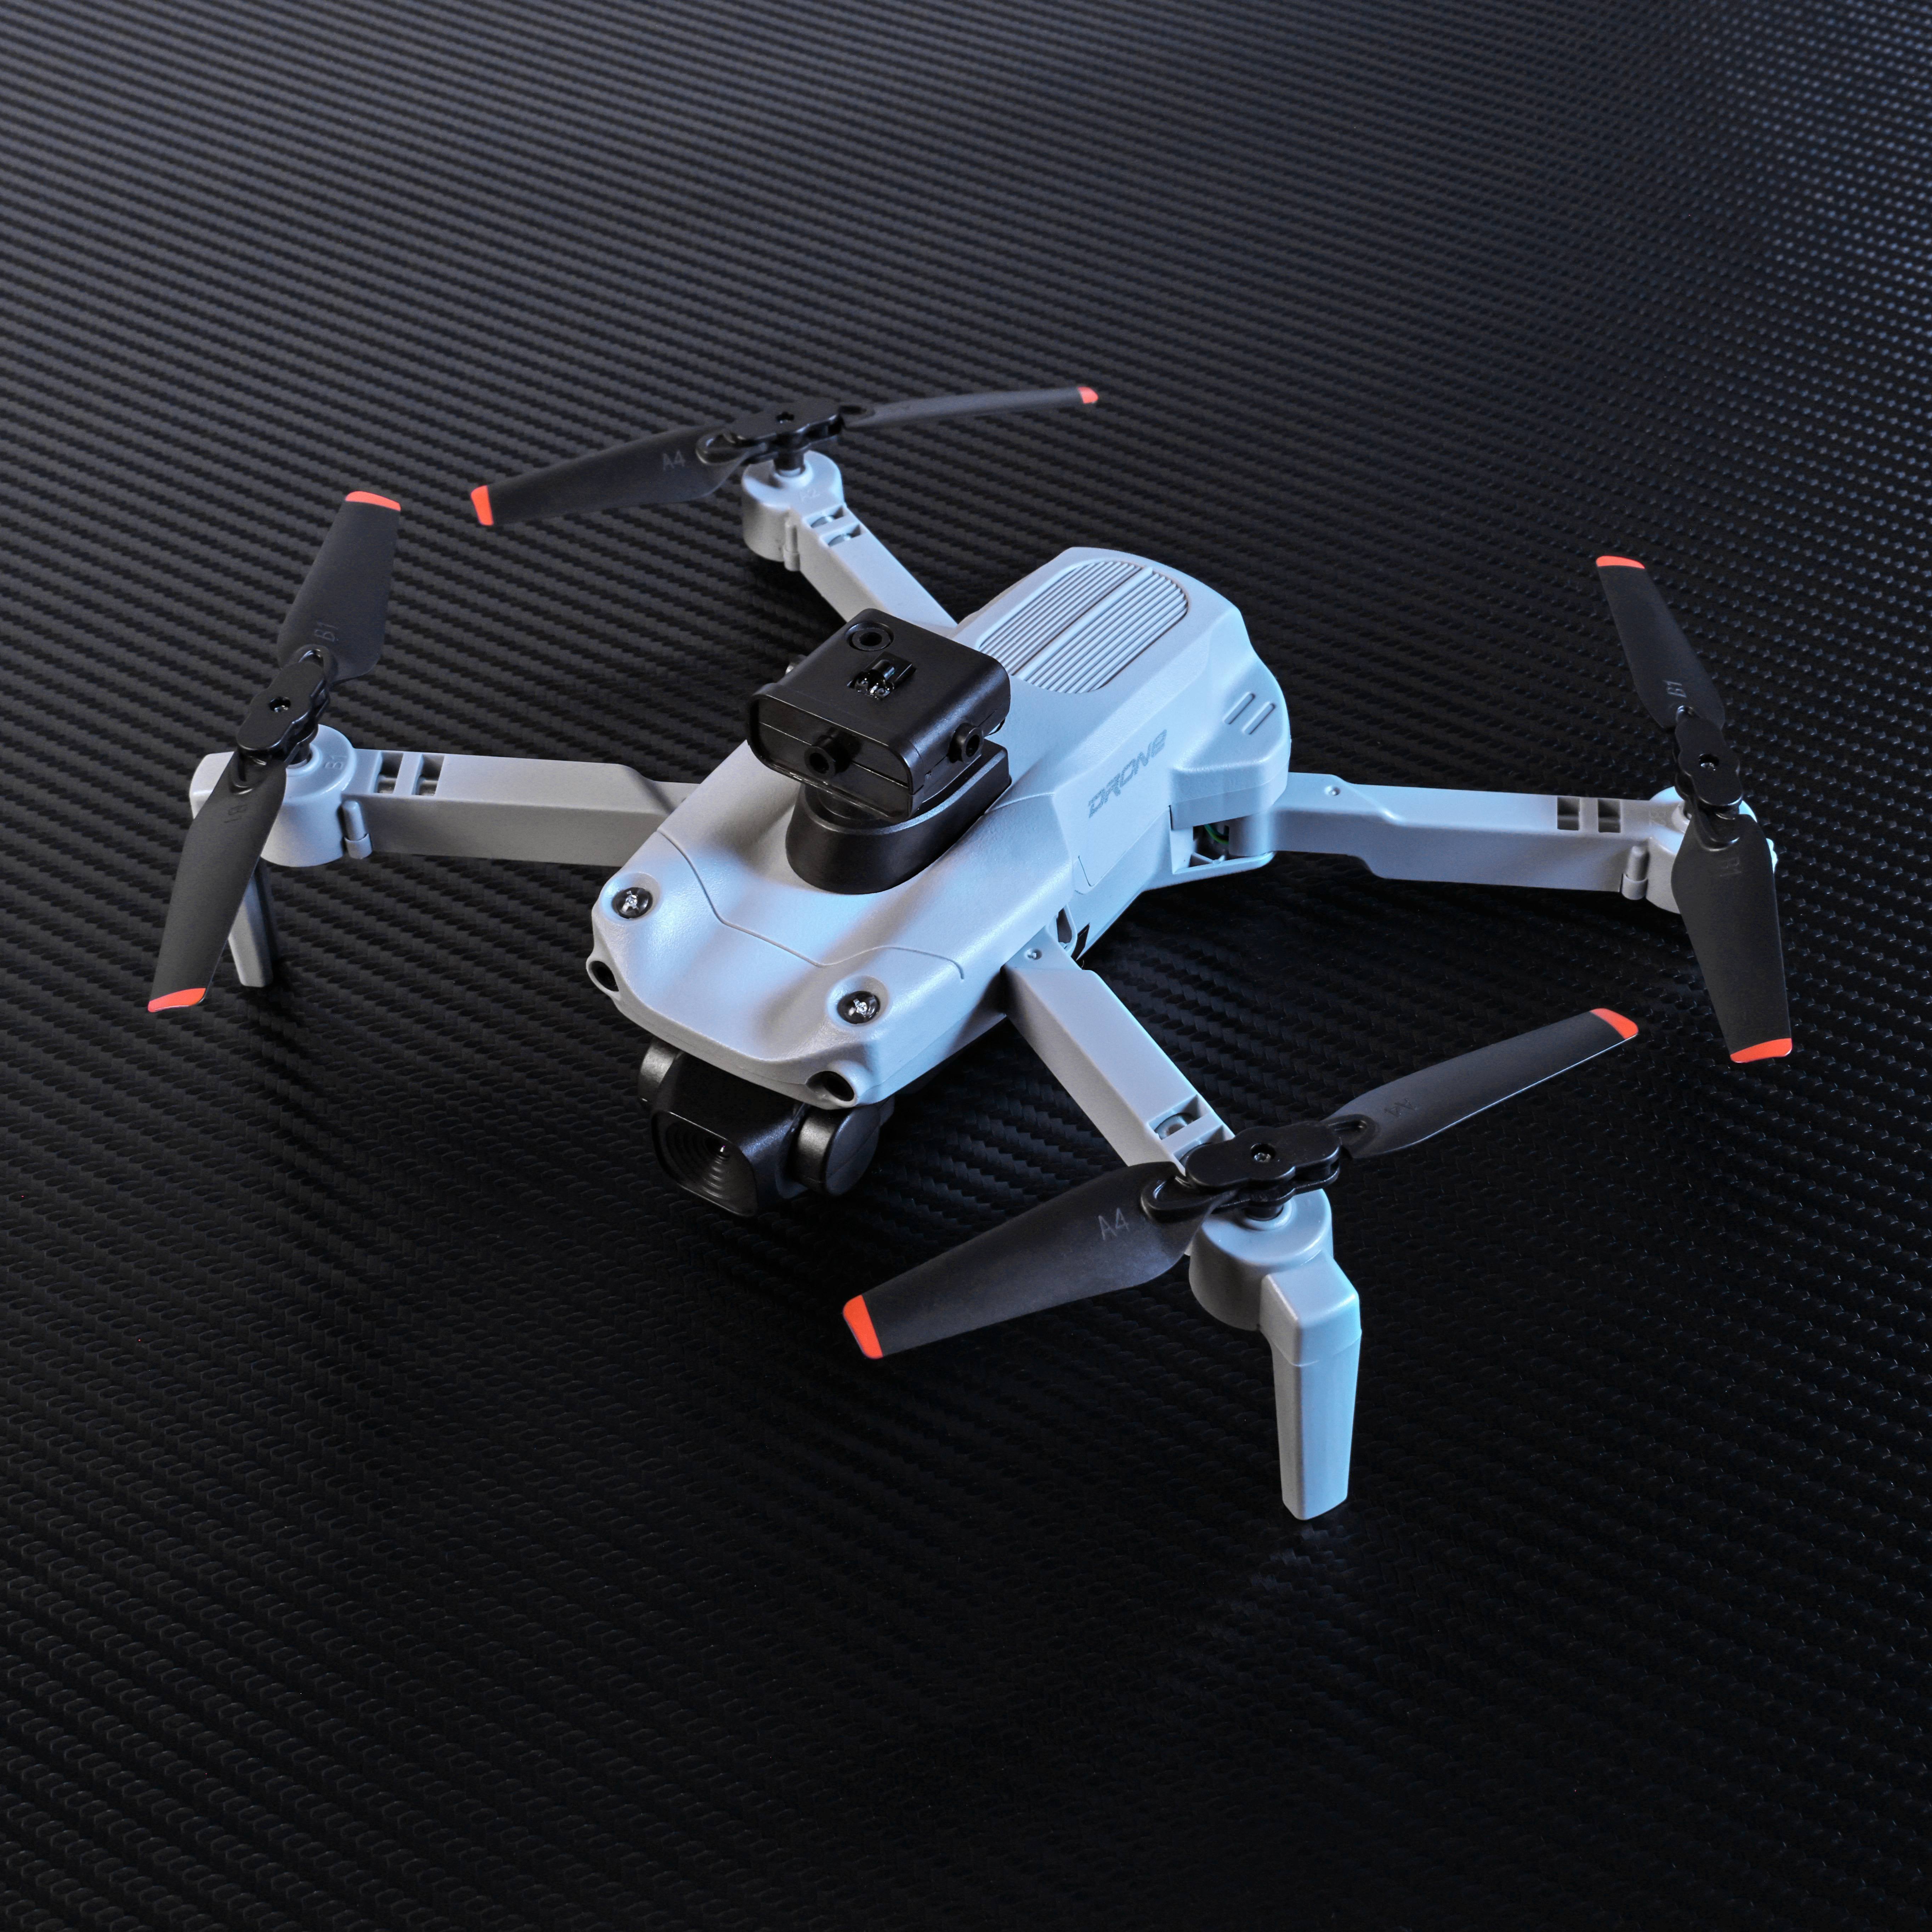 S91 3-Side Obstacle Sensing Drone with Adult 1080P Camera, WiFi HD